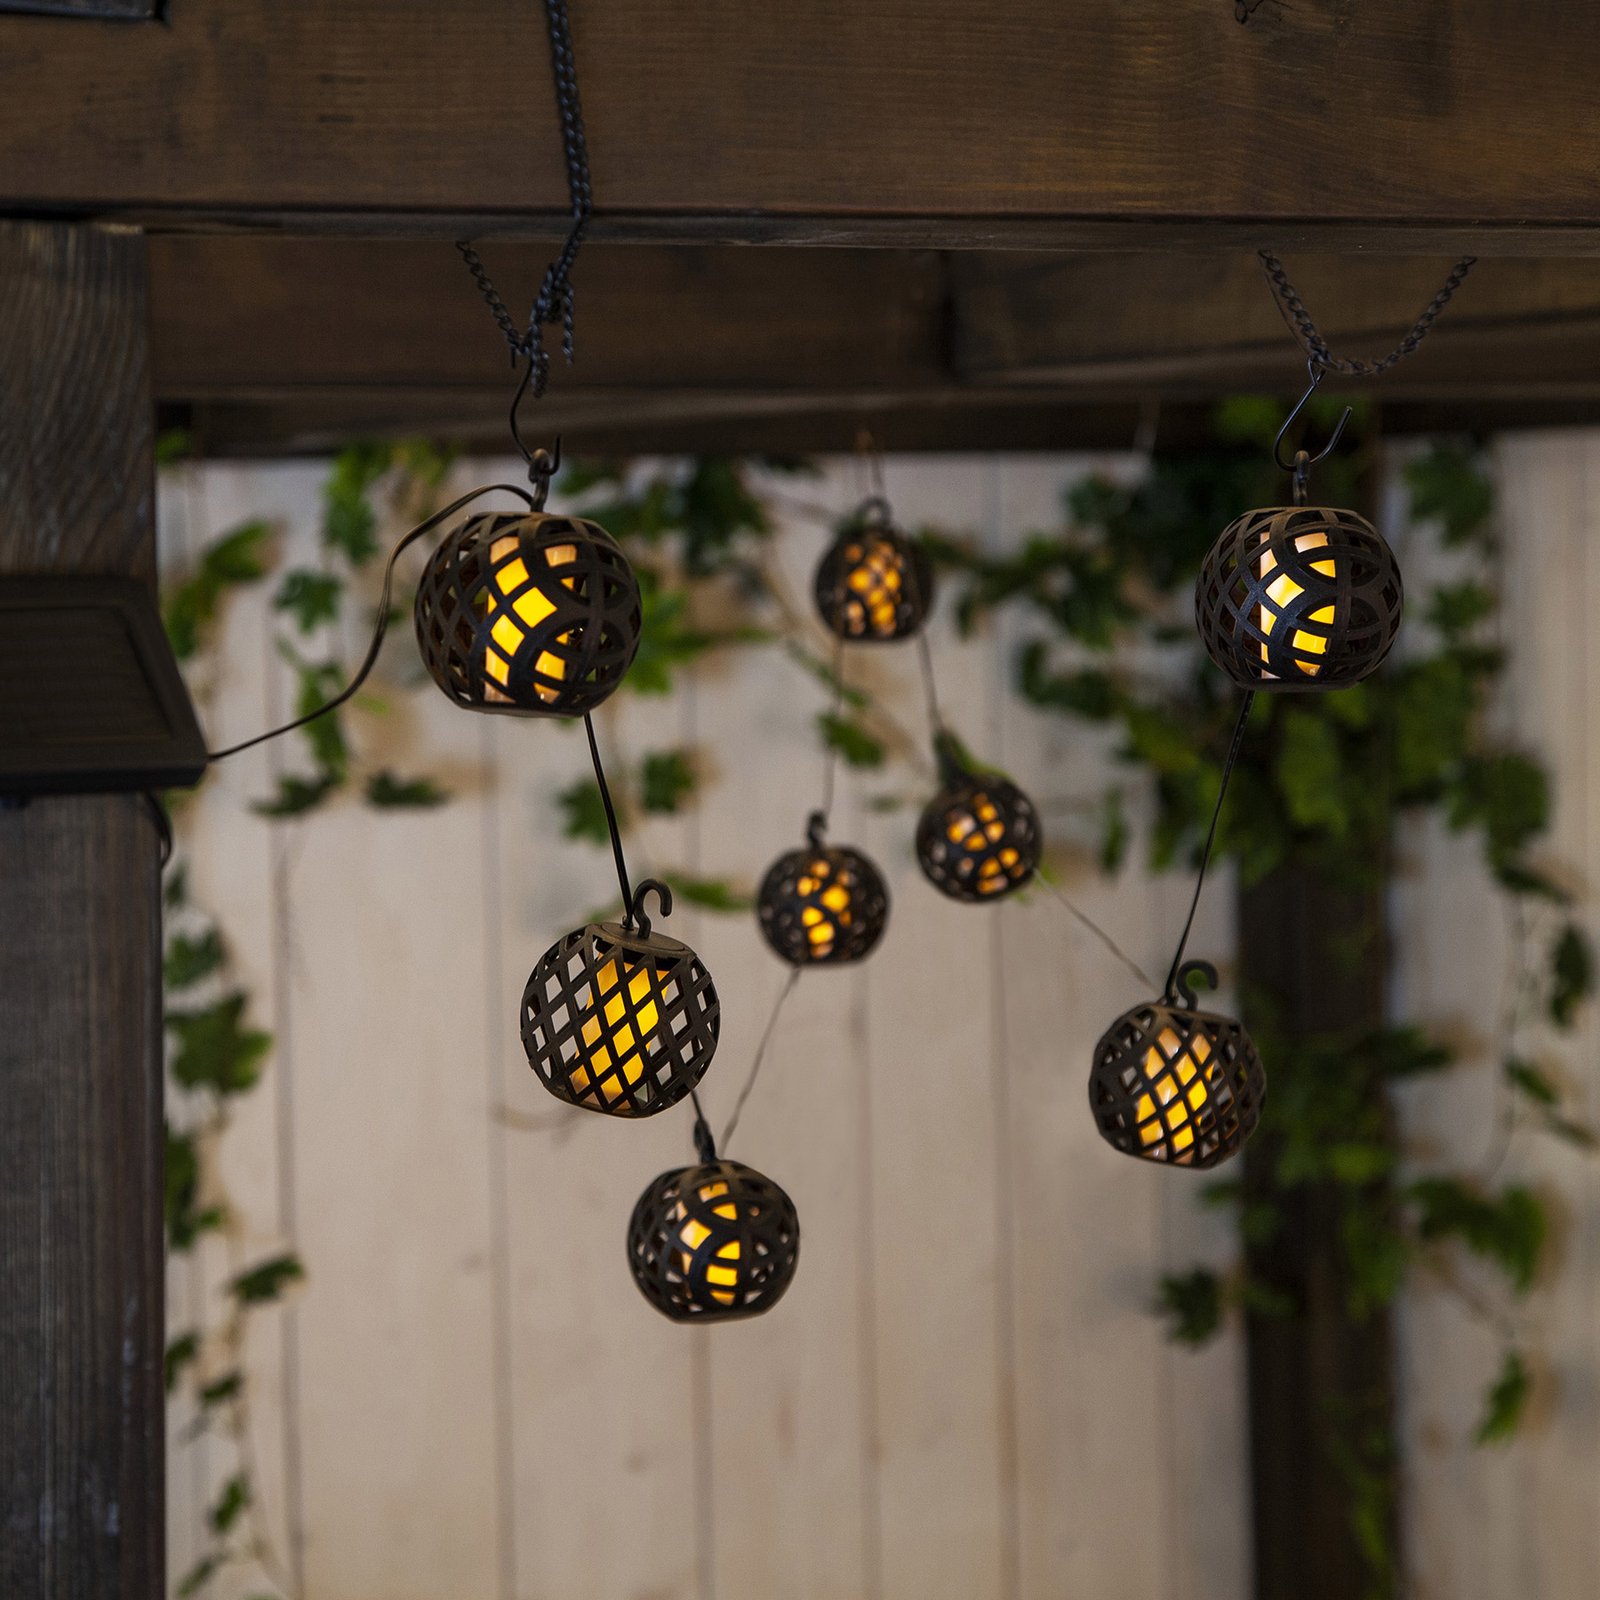 Flame LED solar string lights with a flame effect